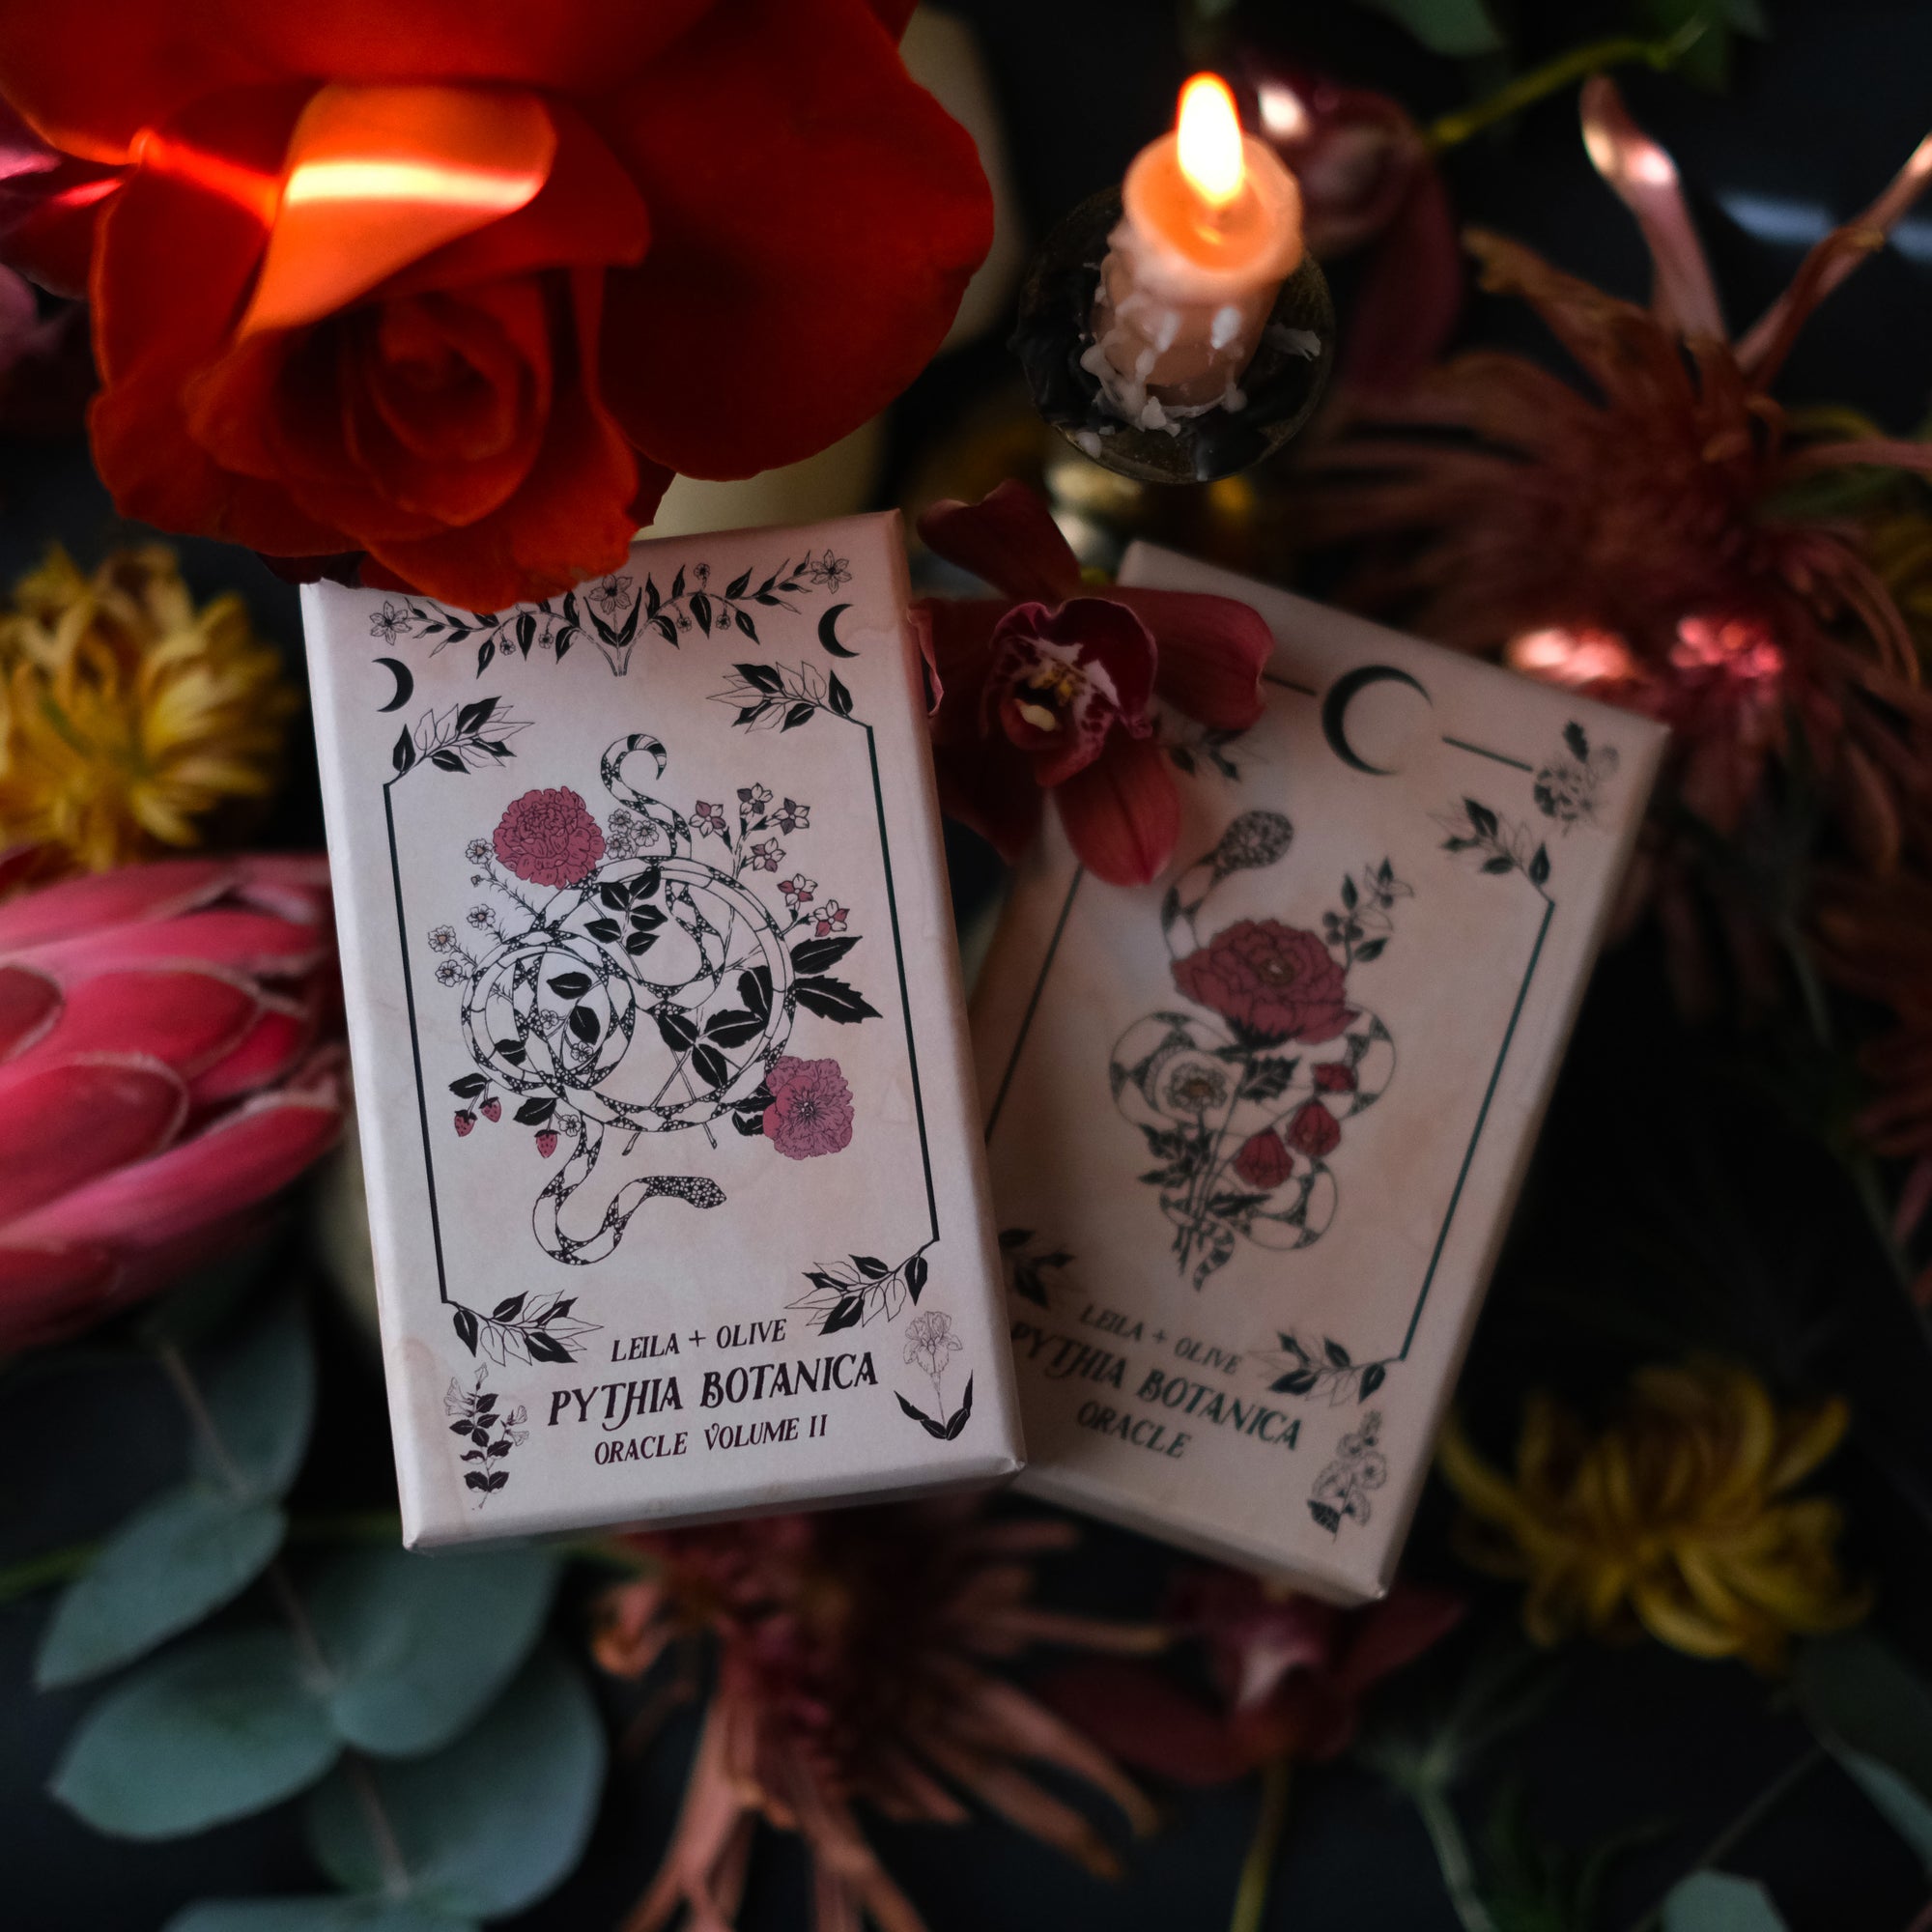 Pythia Botanica Tarot deck is illustrated by hand and rooted in plant magic, the natural world, and ancient mythology. Through 48 botanical oracle cards, we explore the plant world and all of the mystery, magic, wisdom and wonder it provides.